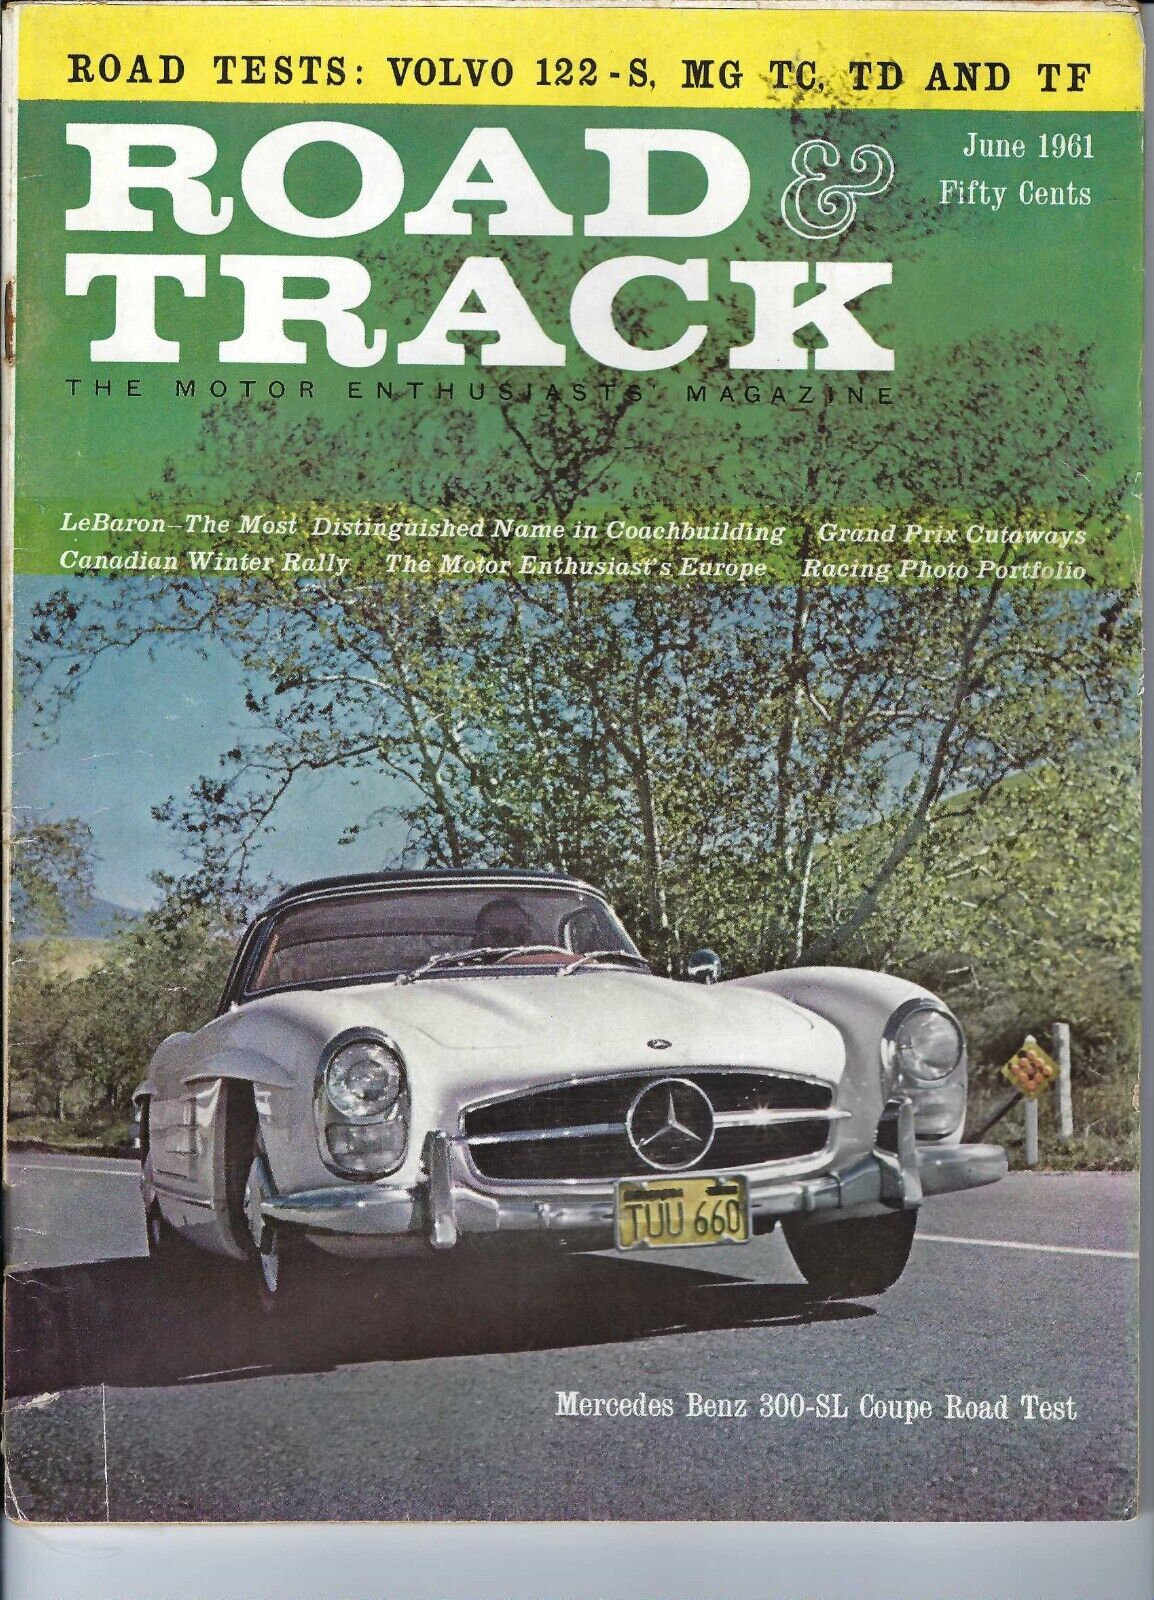 1961 Mercedes Benz 300-SL and Volvo 122-S tested in vintage Road & Track